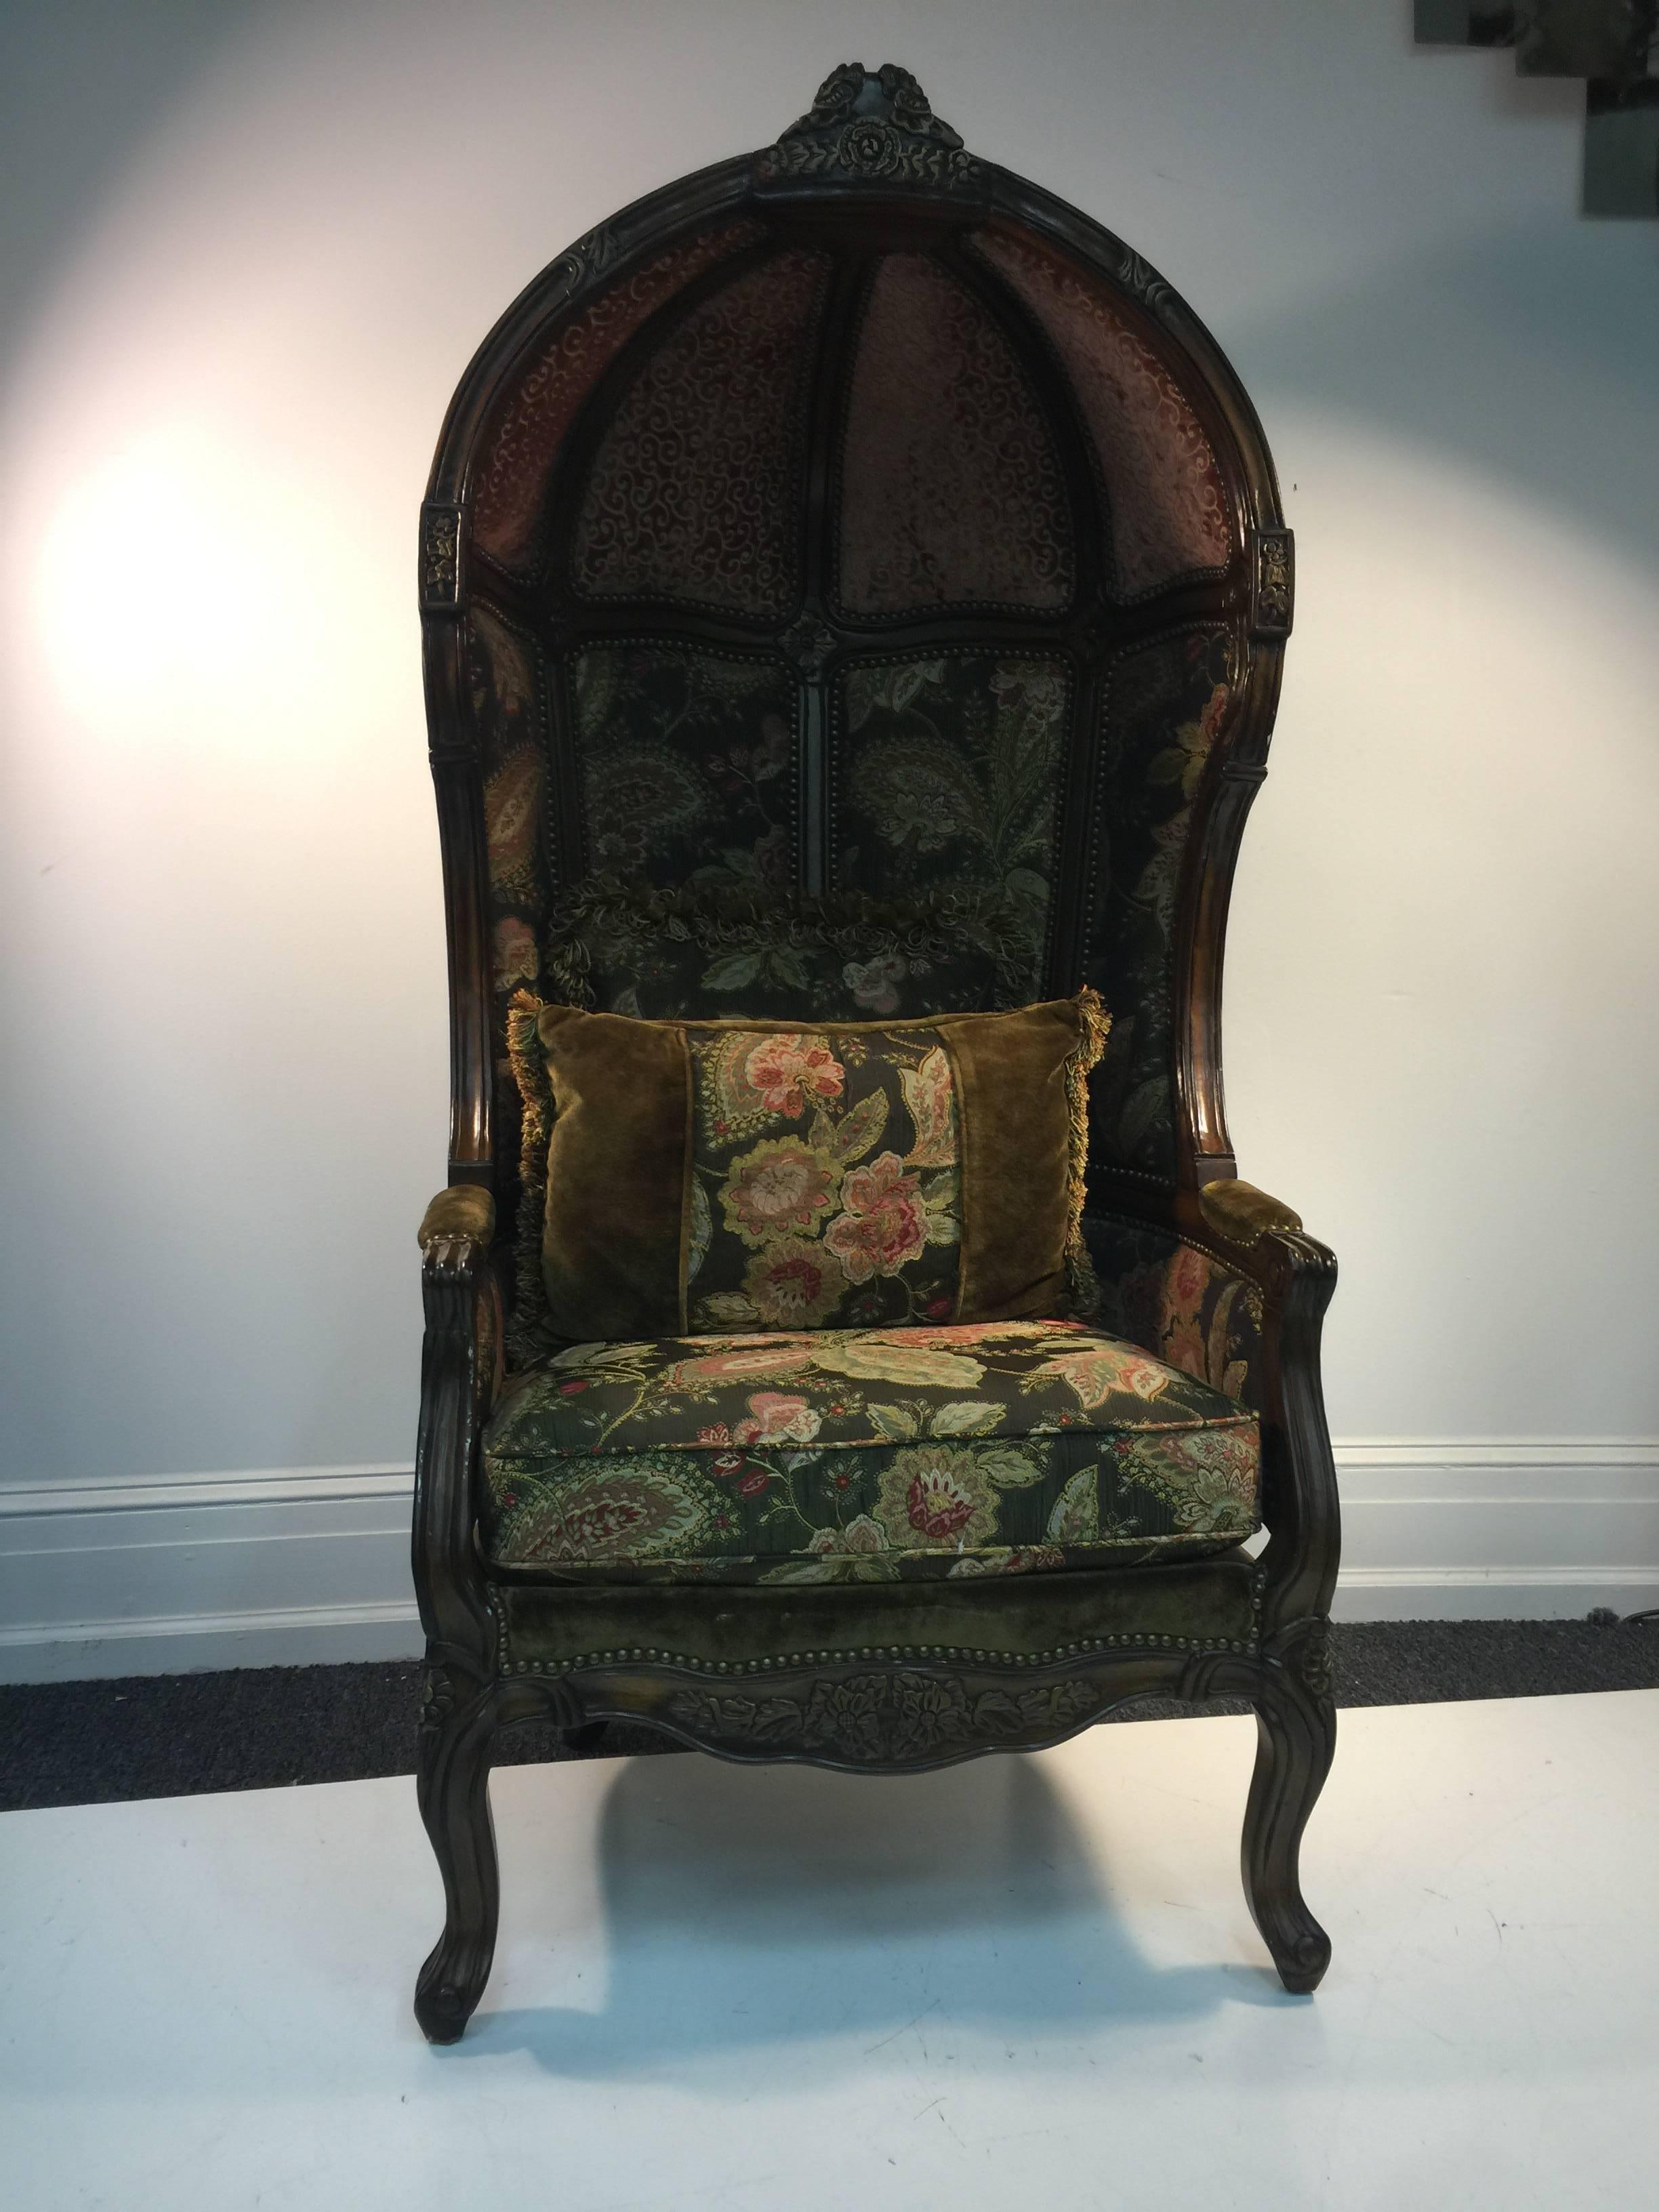 Saint Pierre and Miquelon Exceptional Vintage Canopy Chair with Floral Accents, circa 1970 For Sale